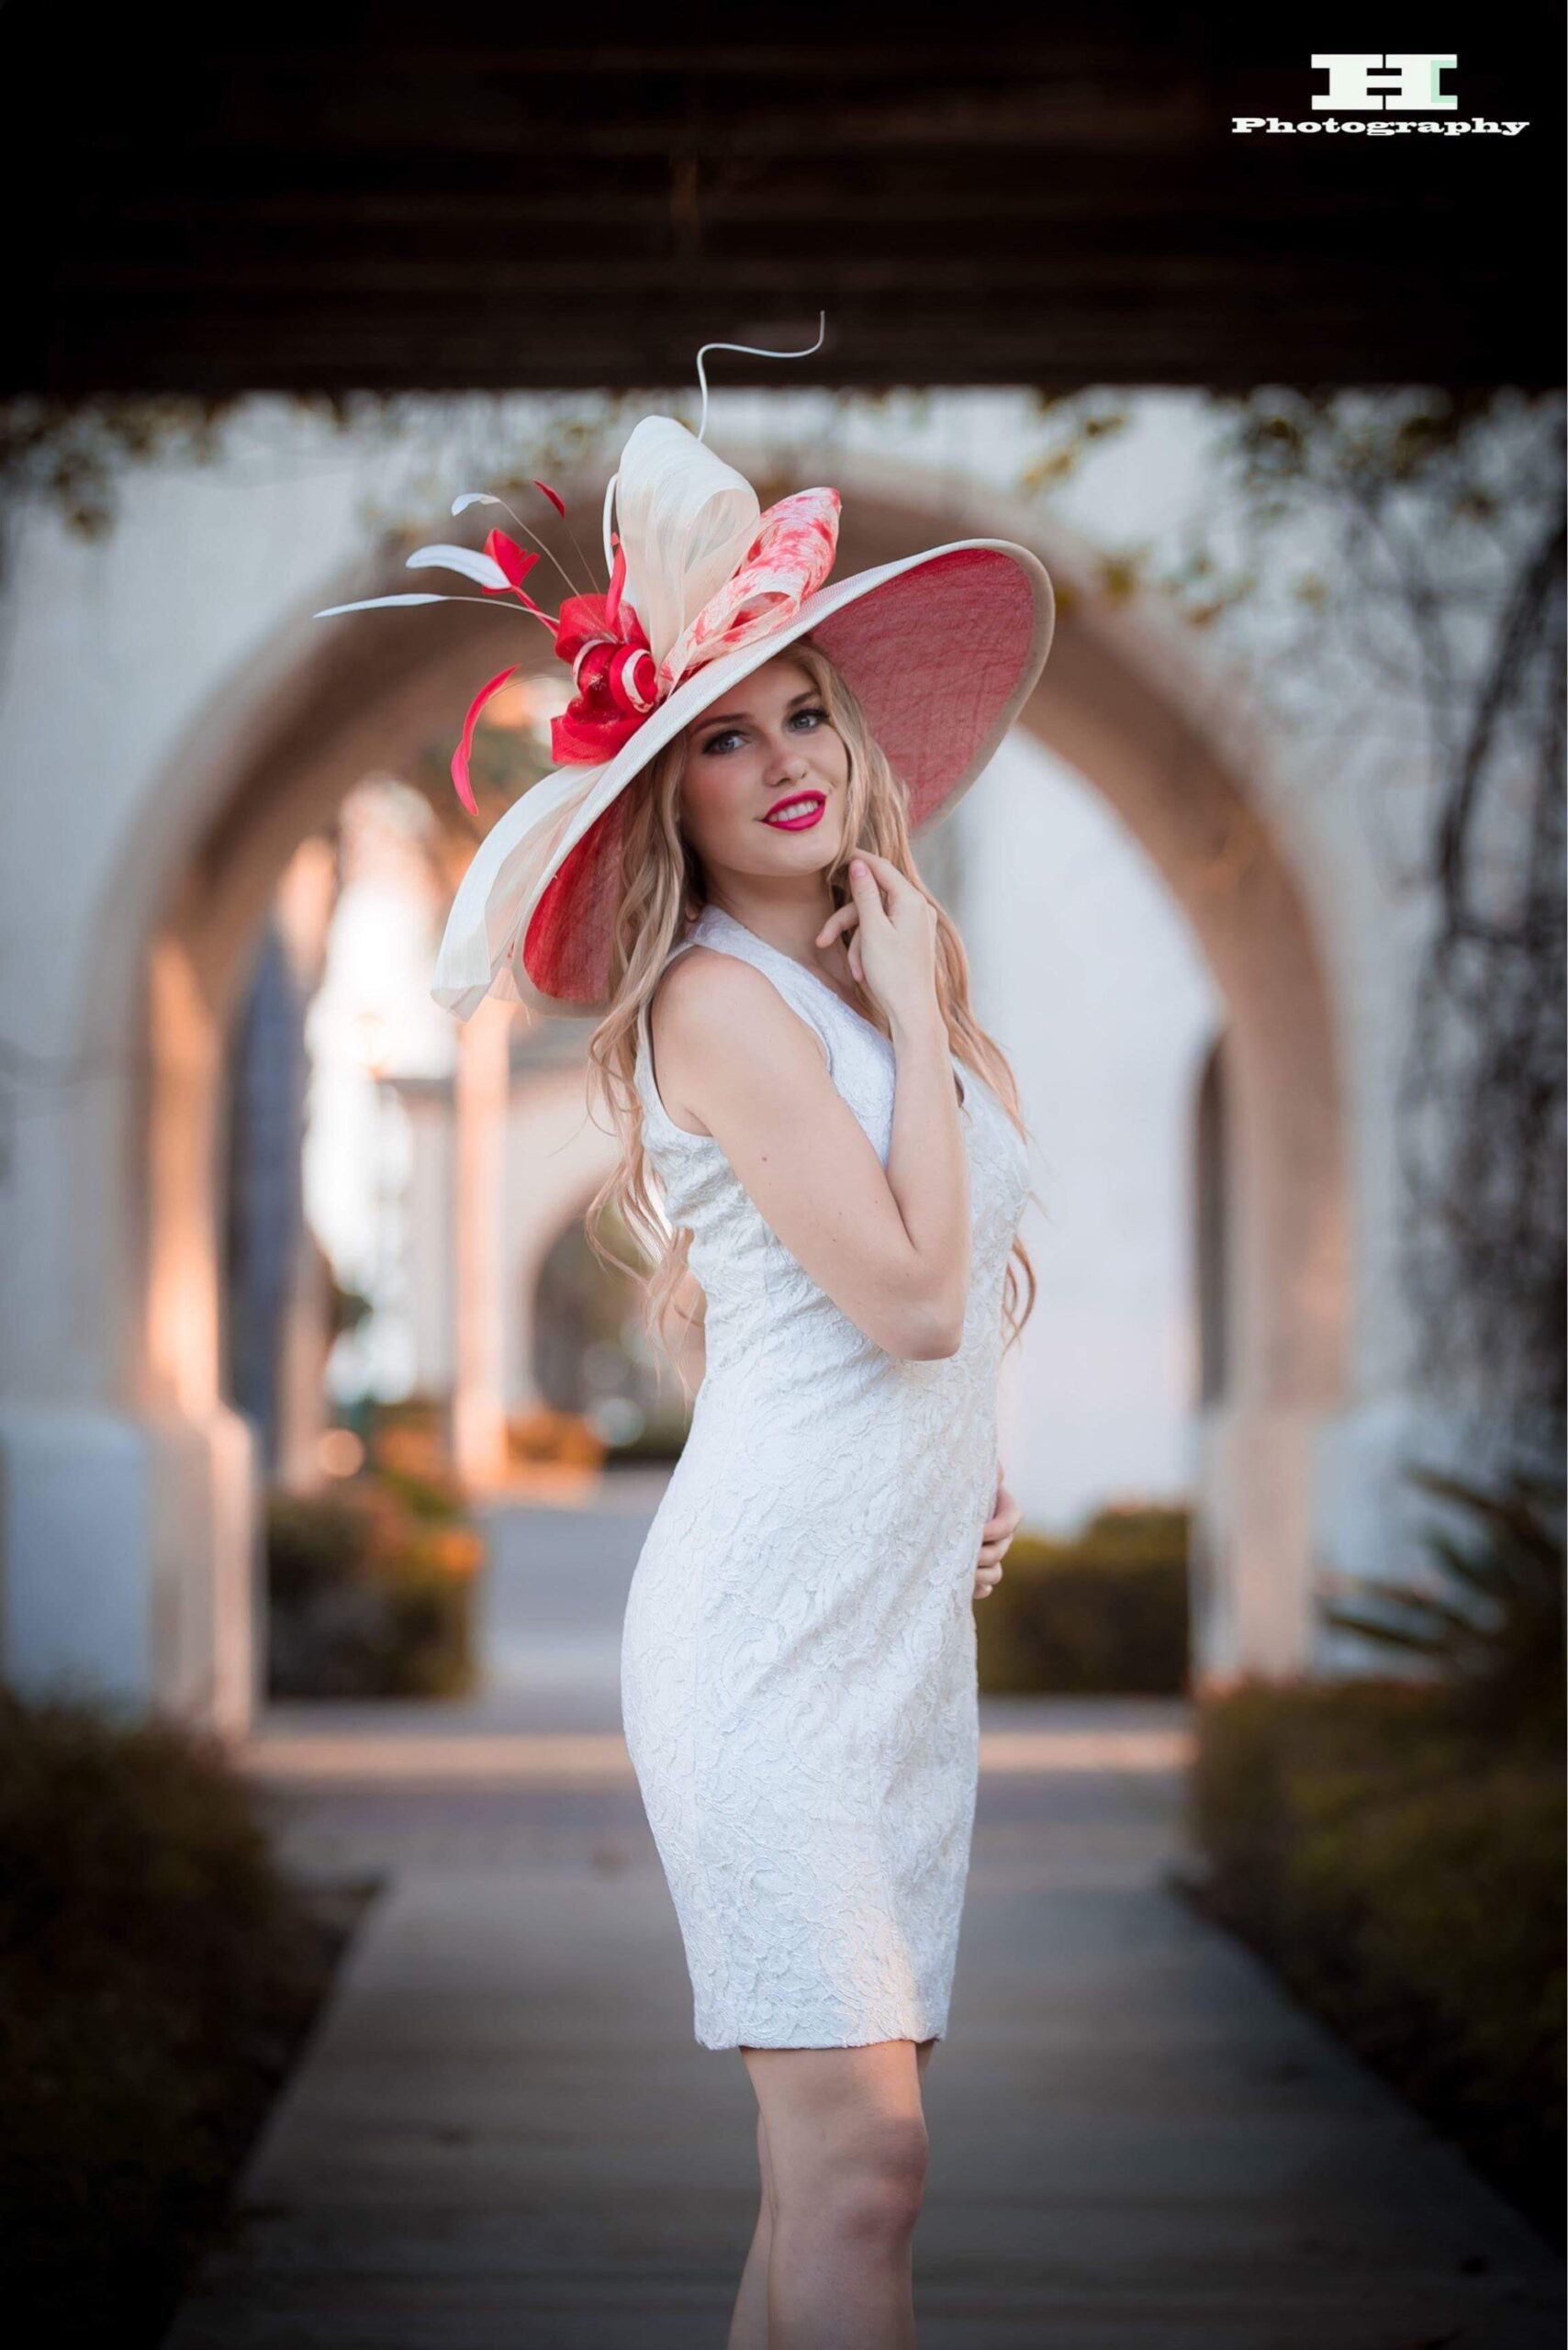 2019 collection . Red hat. Derby hat. Kentucky  derby hat. Dubai hat. Fashion hat. Couture hat. Woman hat. Wedding hat . Royal ascot hat. Iv